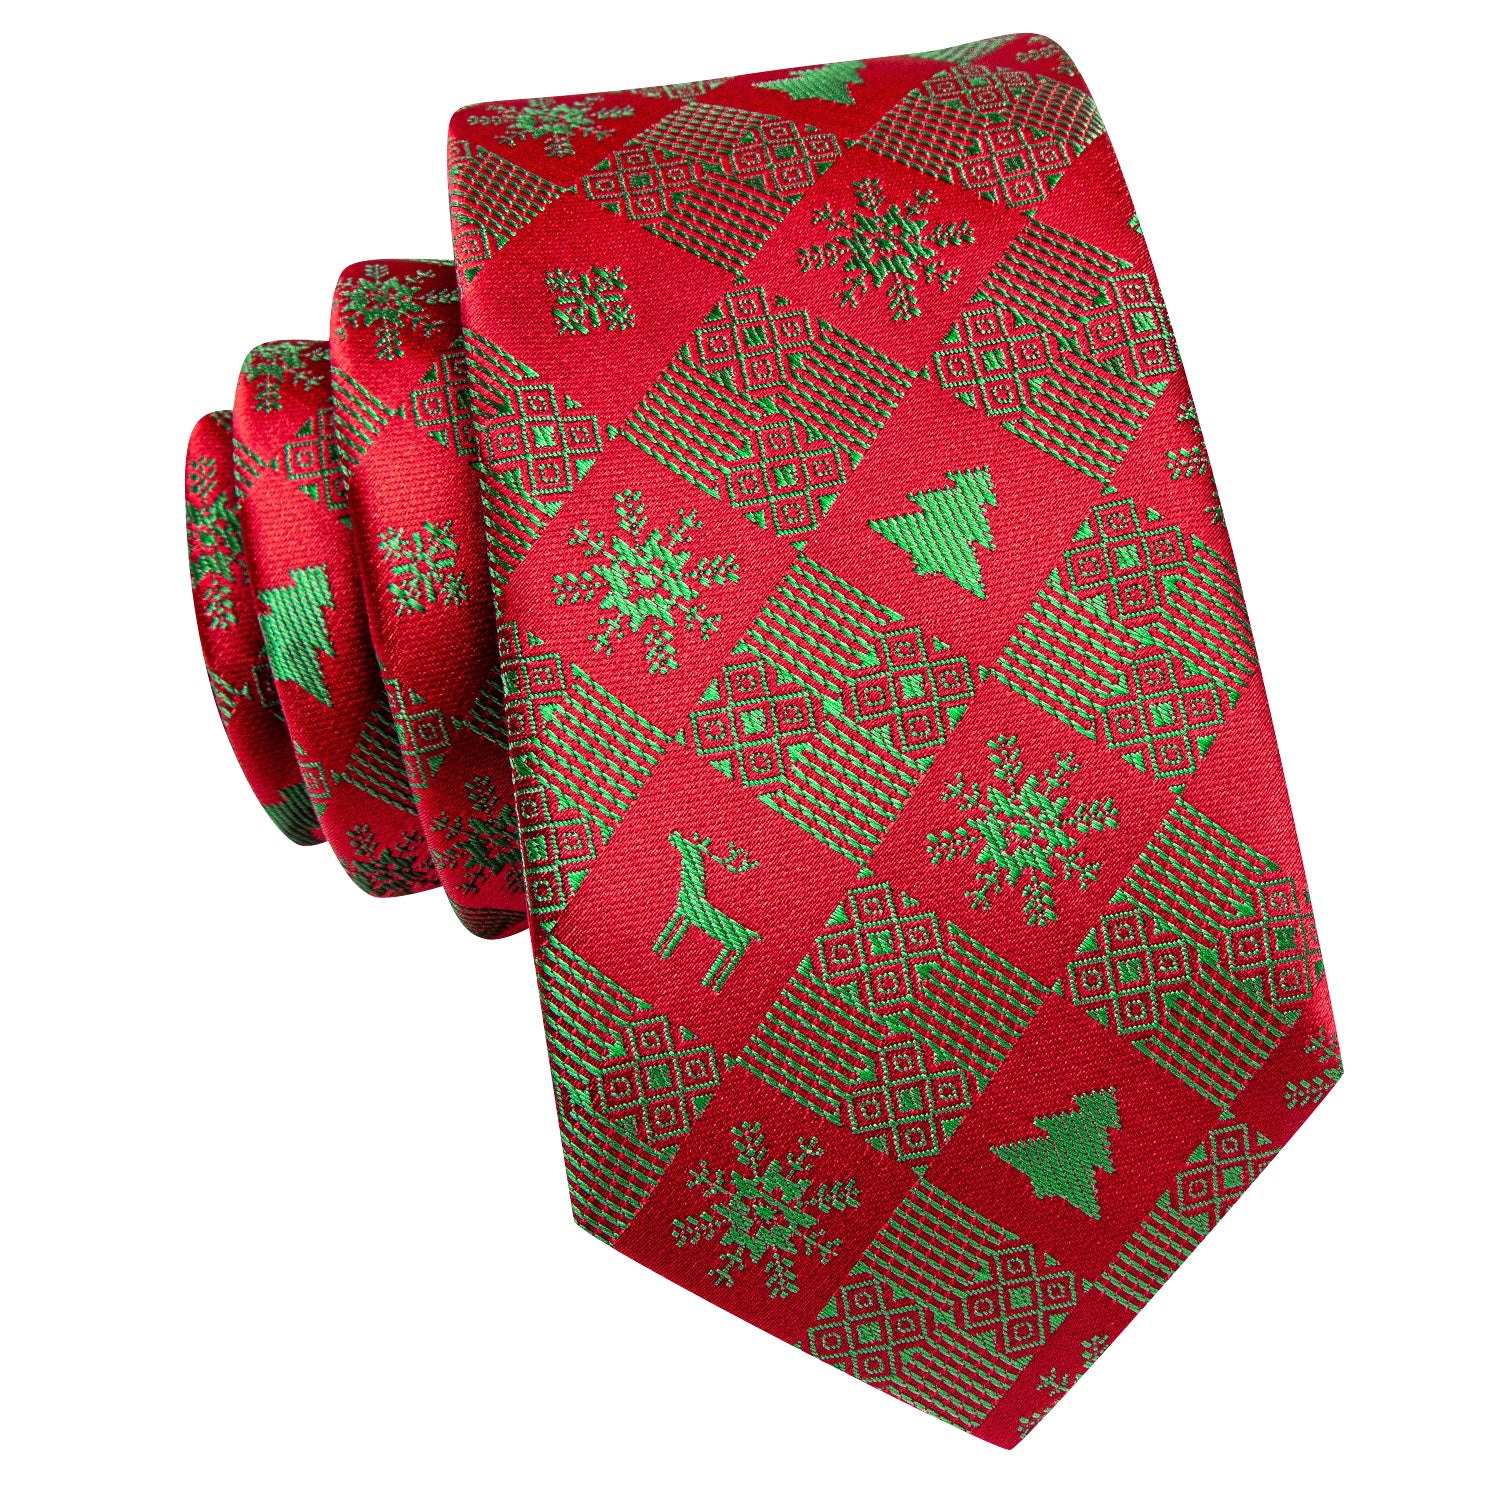 Red Green Christmas Snowflakes Children's Tie Pocket Square